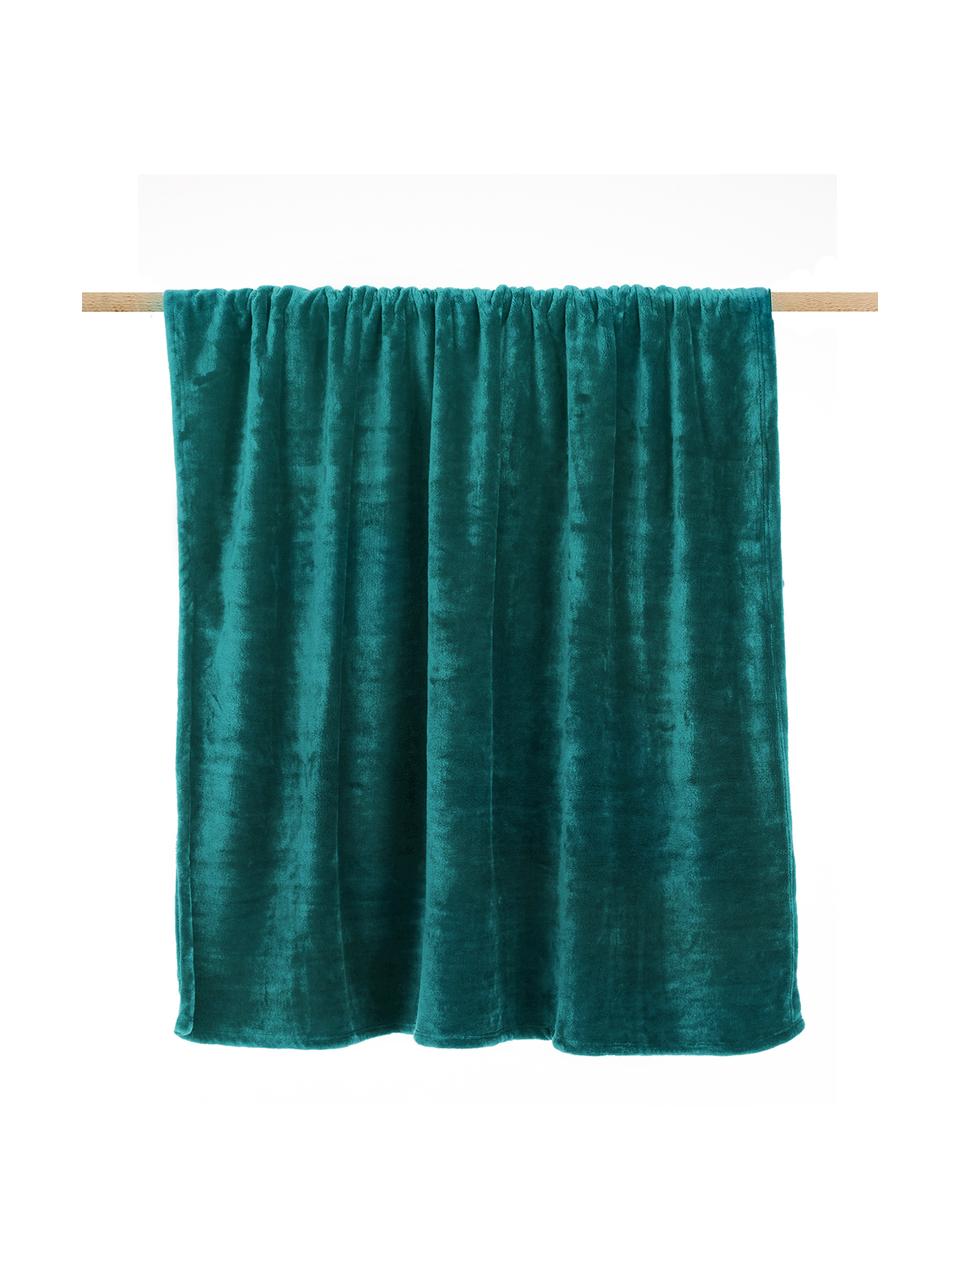 Plaid cocooning turquoise Doudou, 100 % polyester, Vert, larg. 125 x long. 160 cm